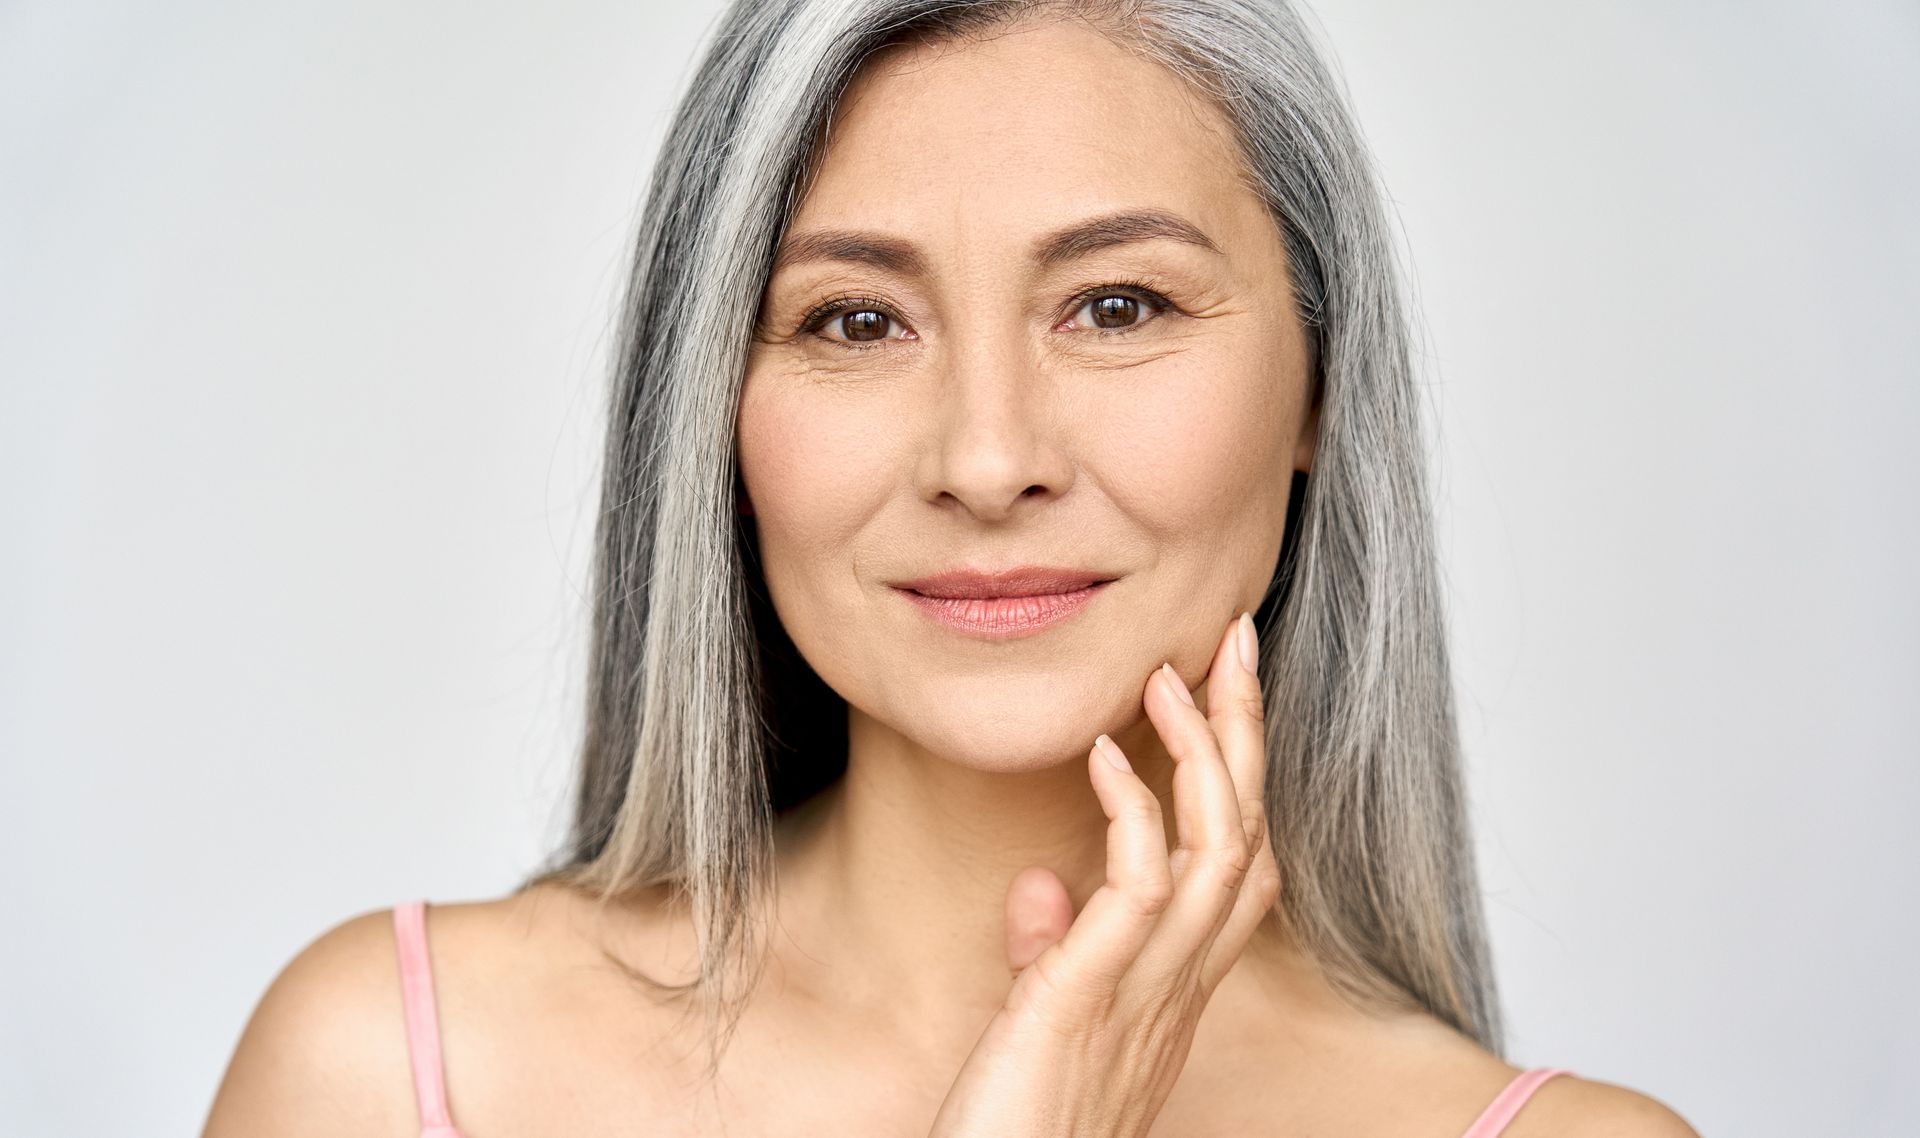 A woman with gray hair is touching her face and smiling.